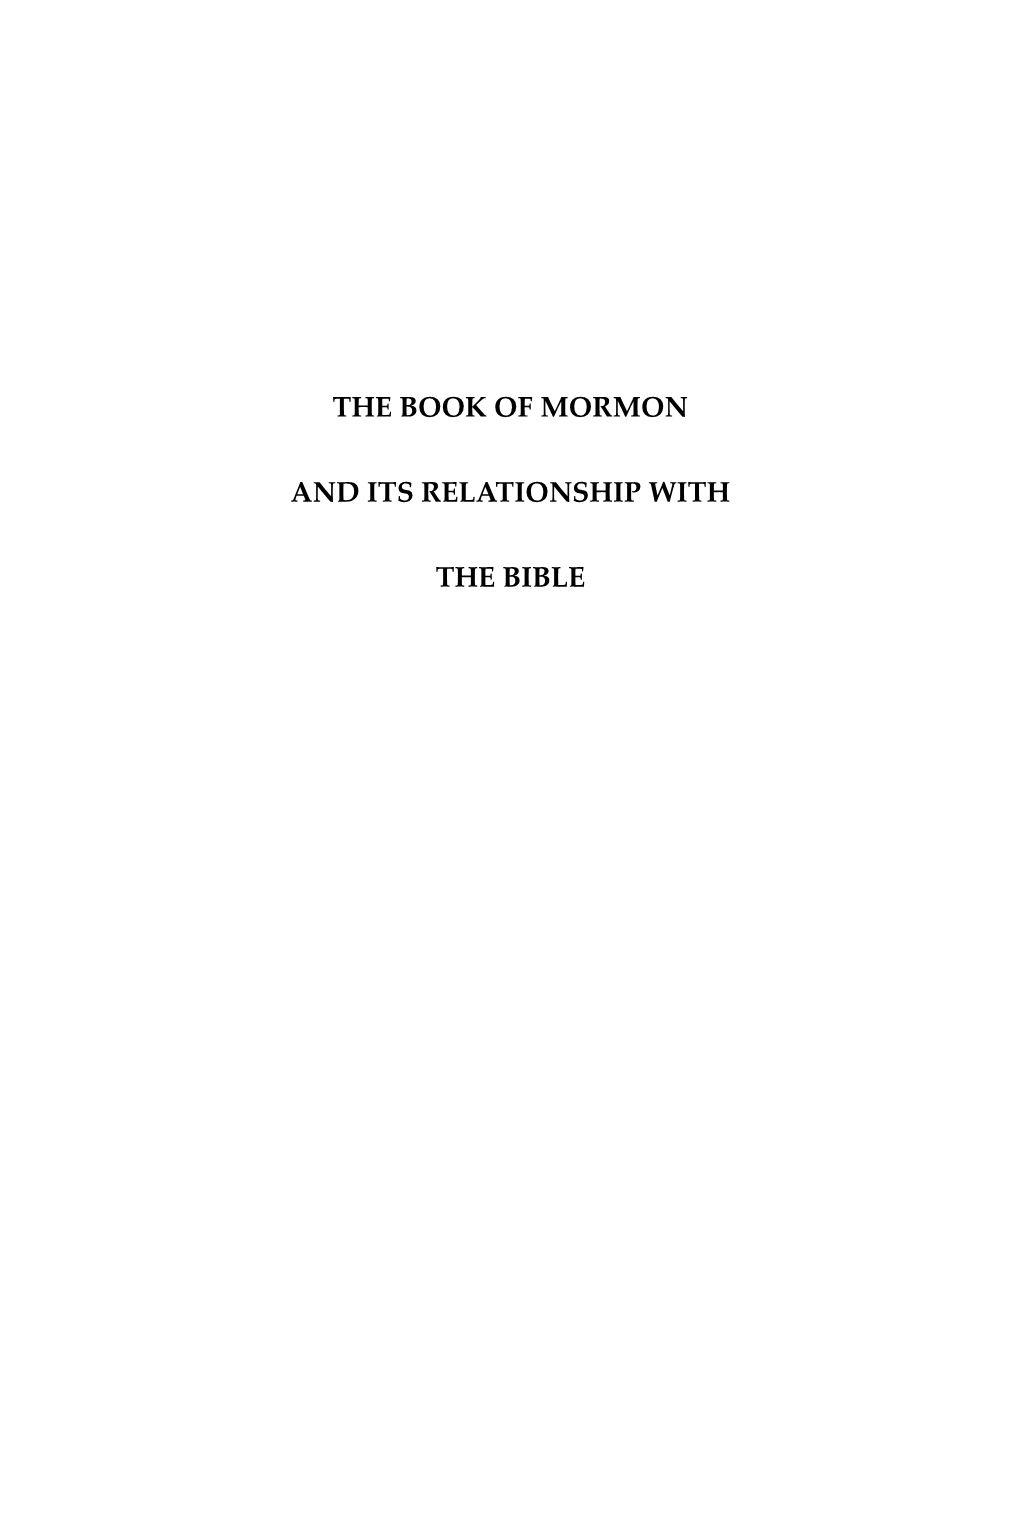 The Book of Mormon and Its Relationship with the Bible